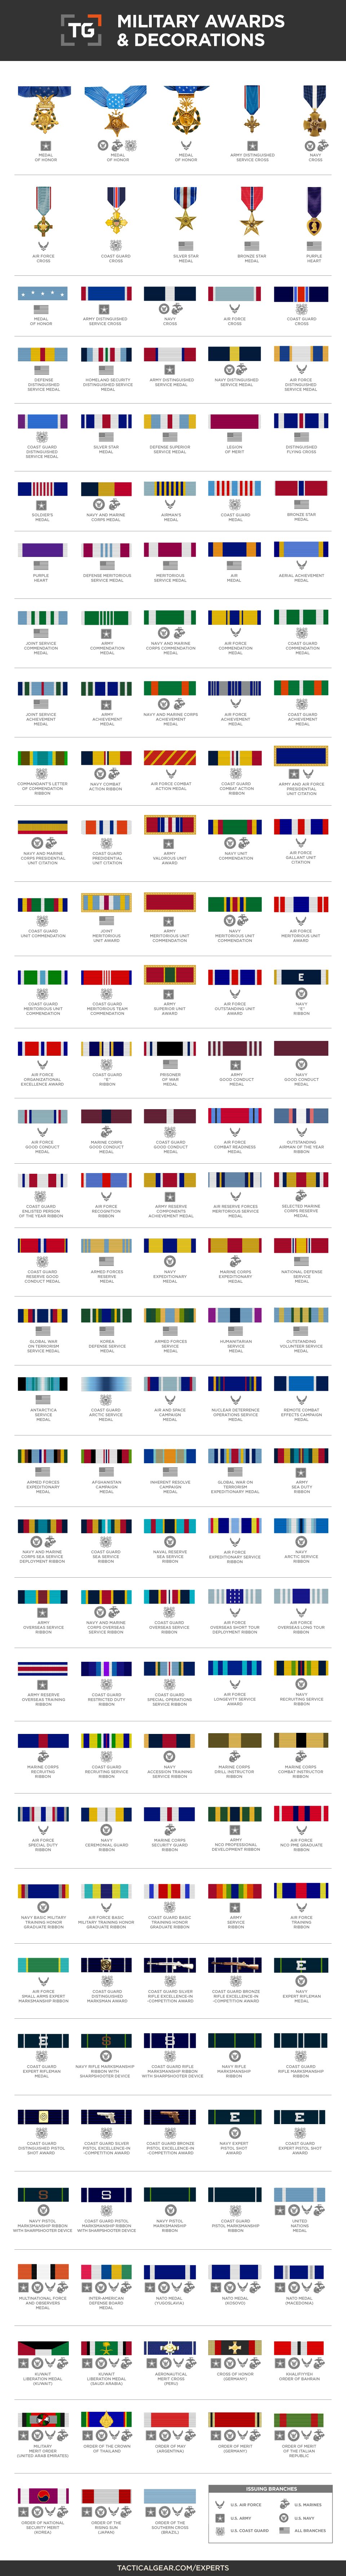 United States Military Awards and Decorations Guide | Tactical ...